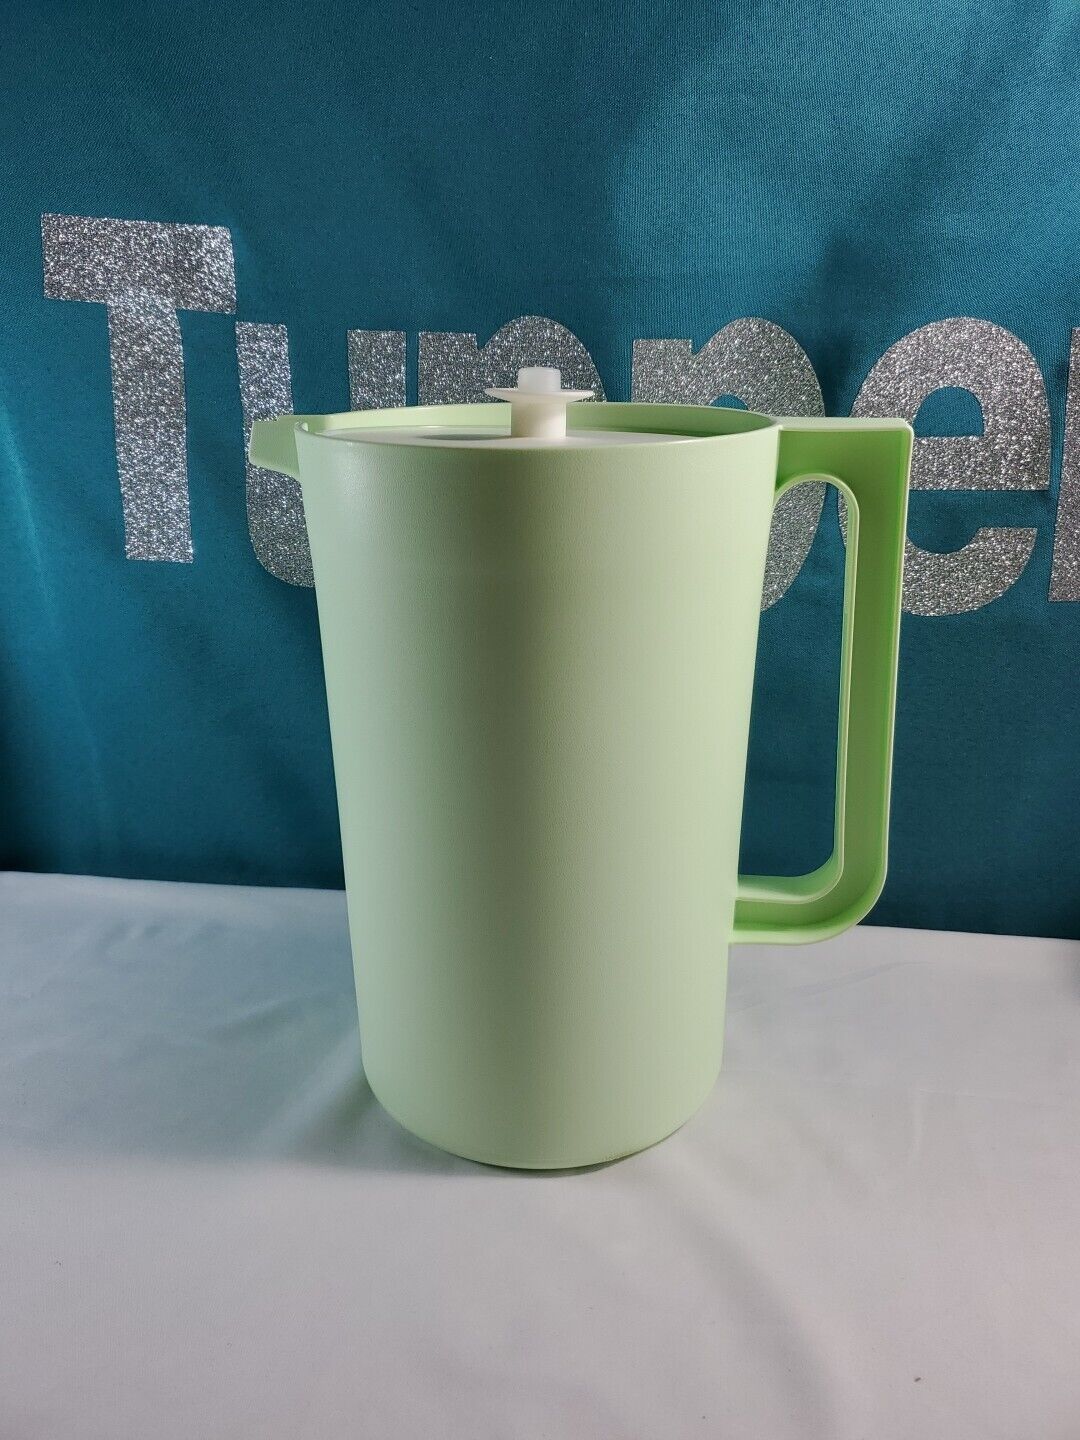 Tupperware Vintage Collection Jumbo Pitcher 1 Gallon Pastel Mint Green 1gal